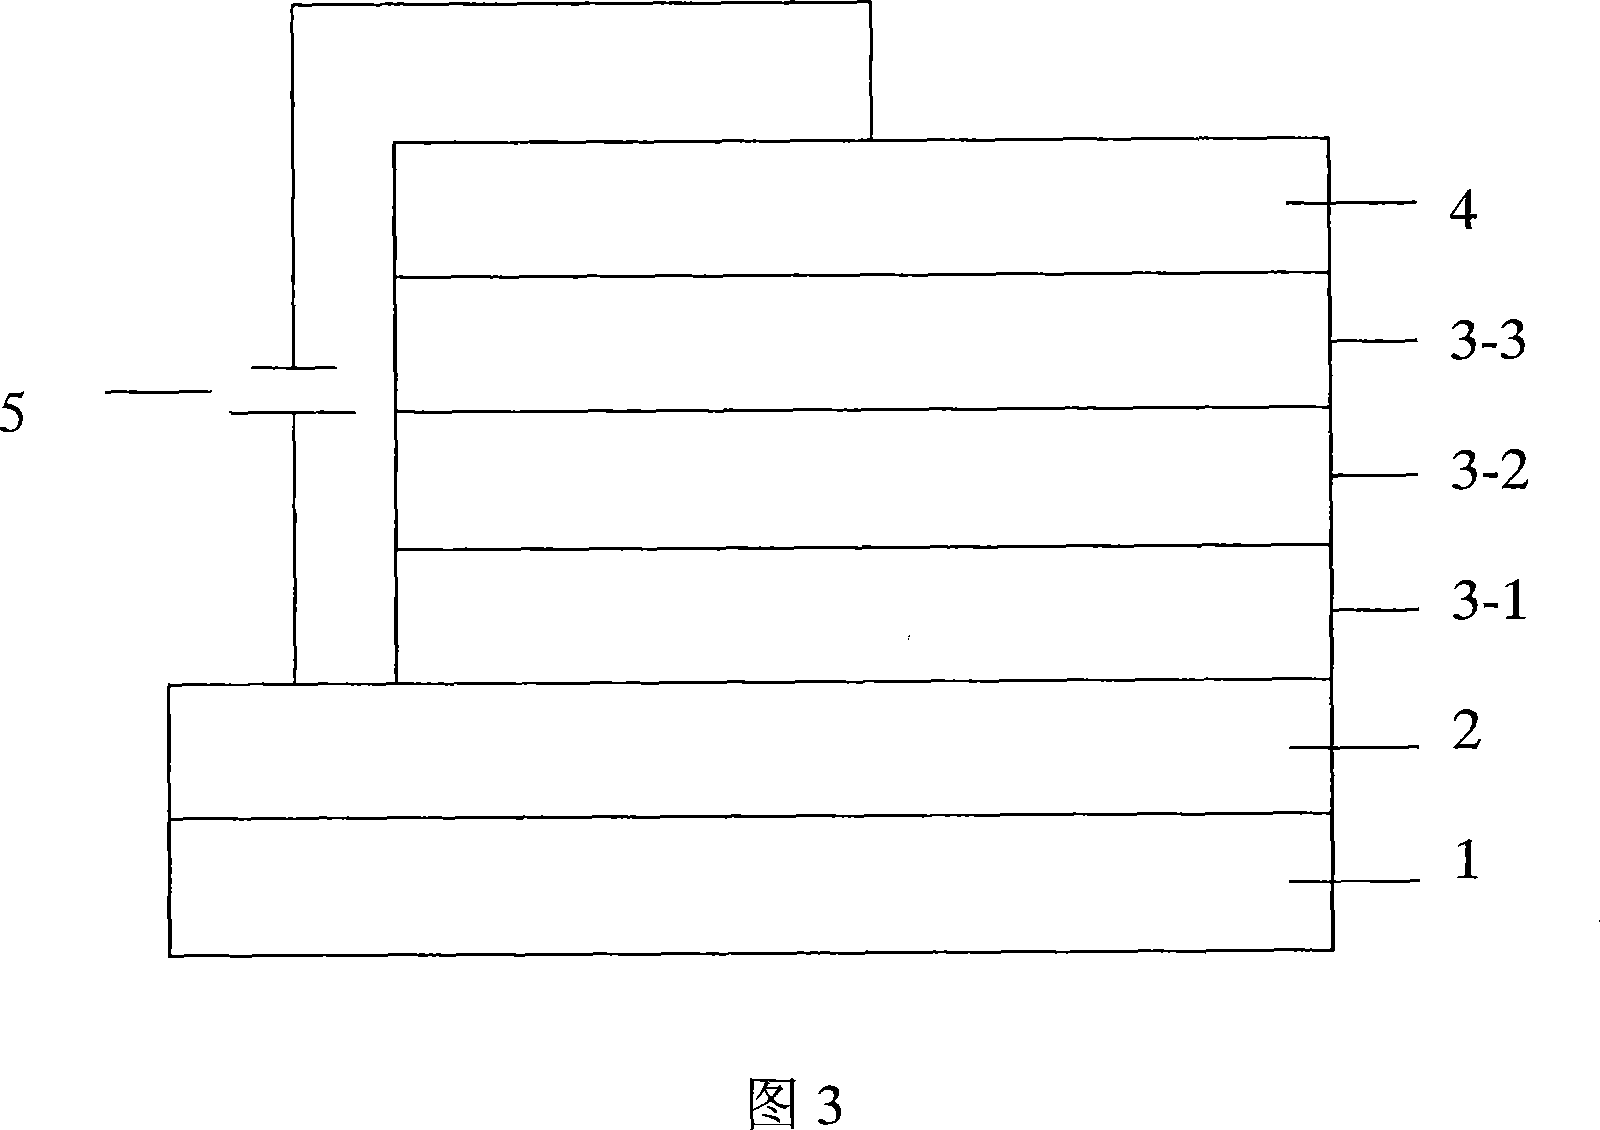 Organic electroluminescent device with hole transmitting regulating and controlling character